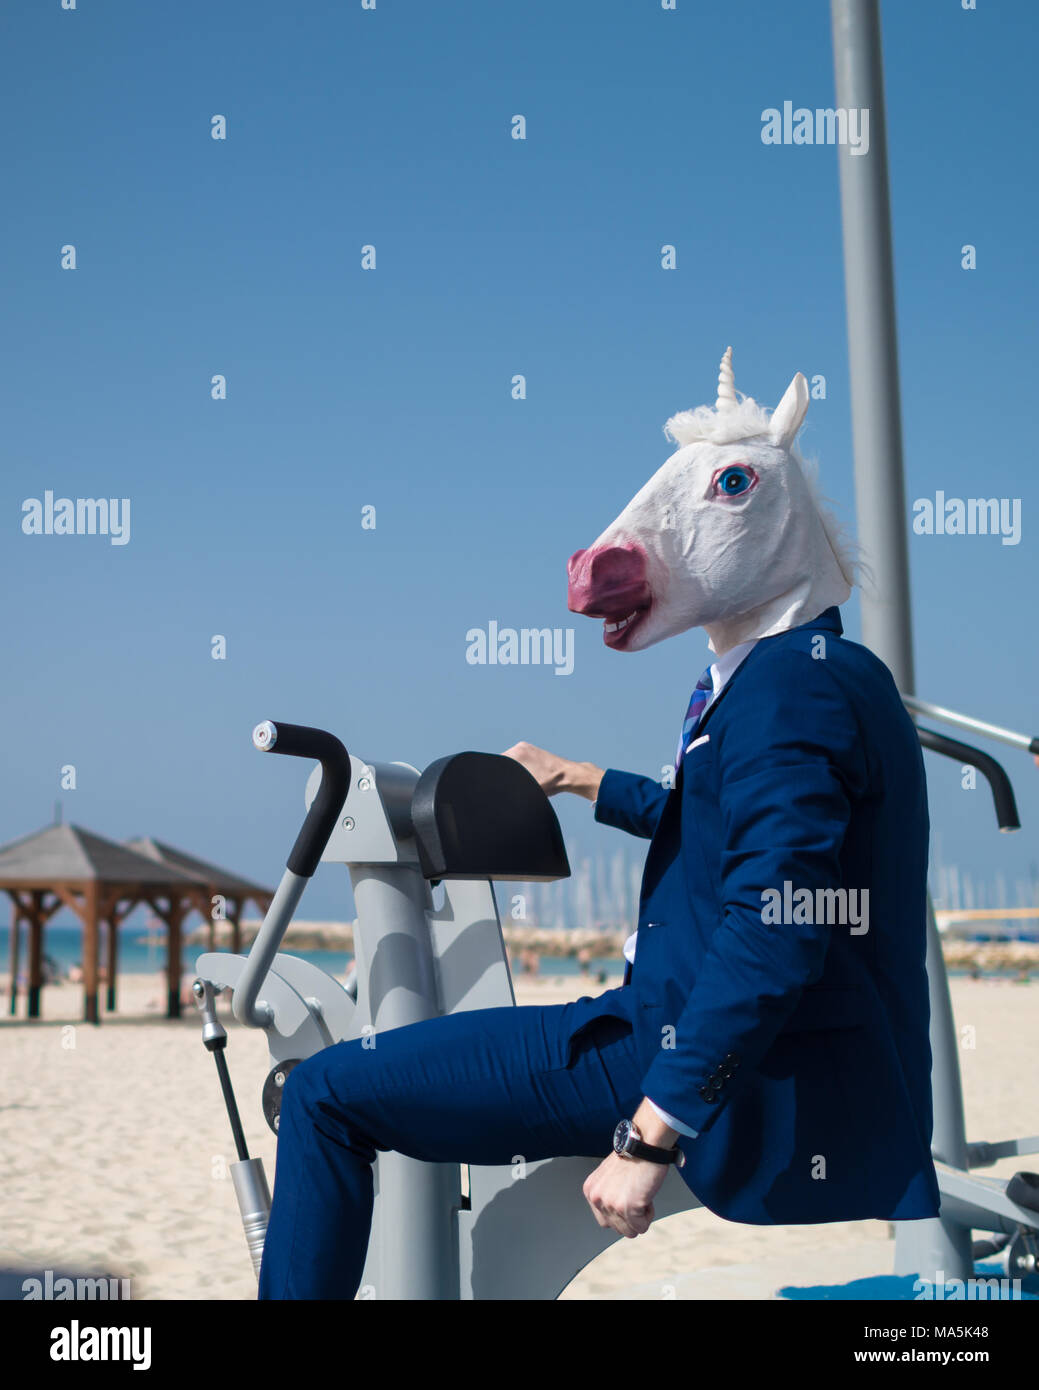 in suit and mask does exercises at sport ground near beachfront. Unusual man pumps muscles. Funny is engaged in fitness outdoors Stock Photo - Alamy